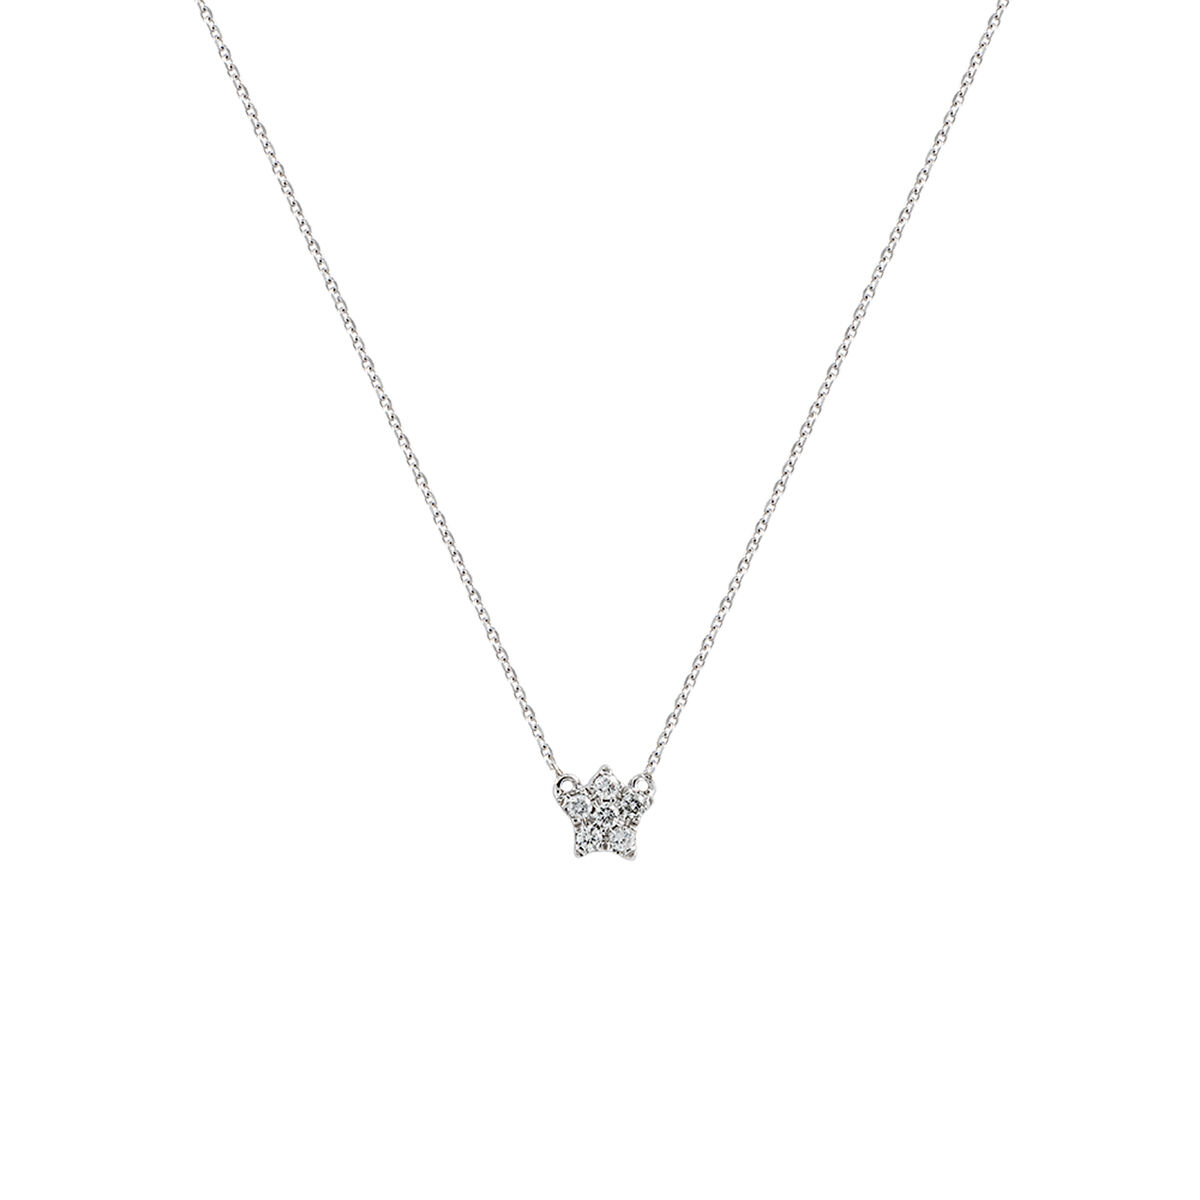 Star-shaped pendant in 18kt white gold with diamonds , J01357-01, hi-res